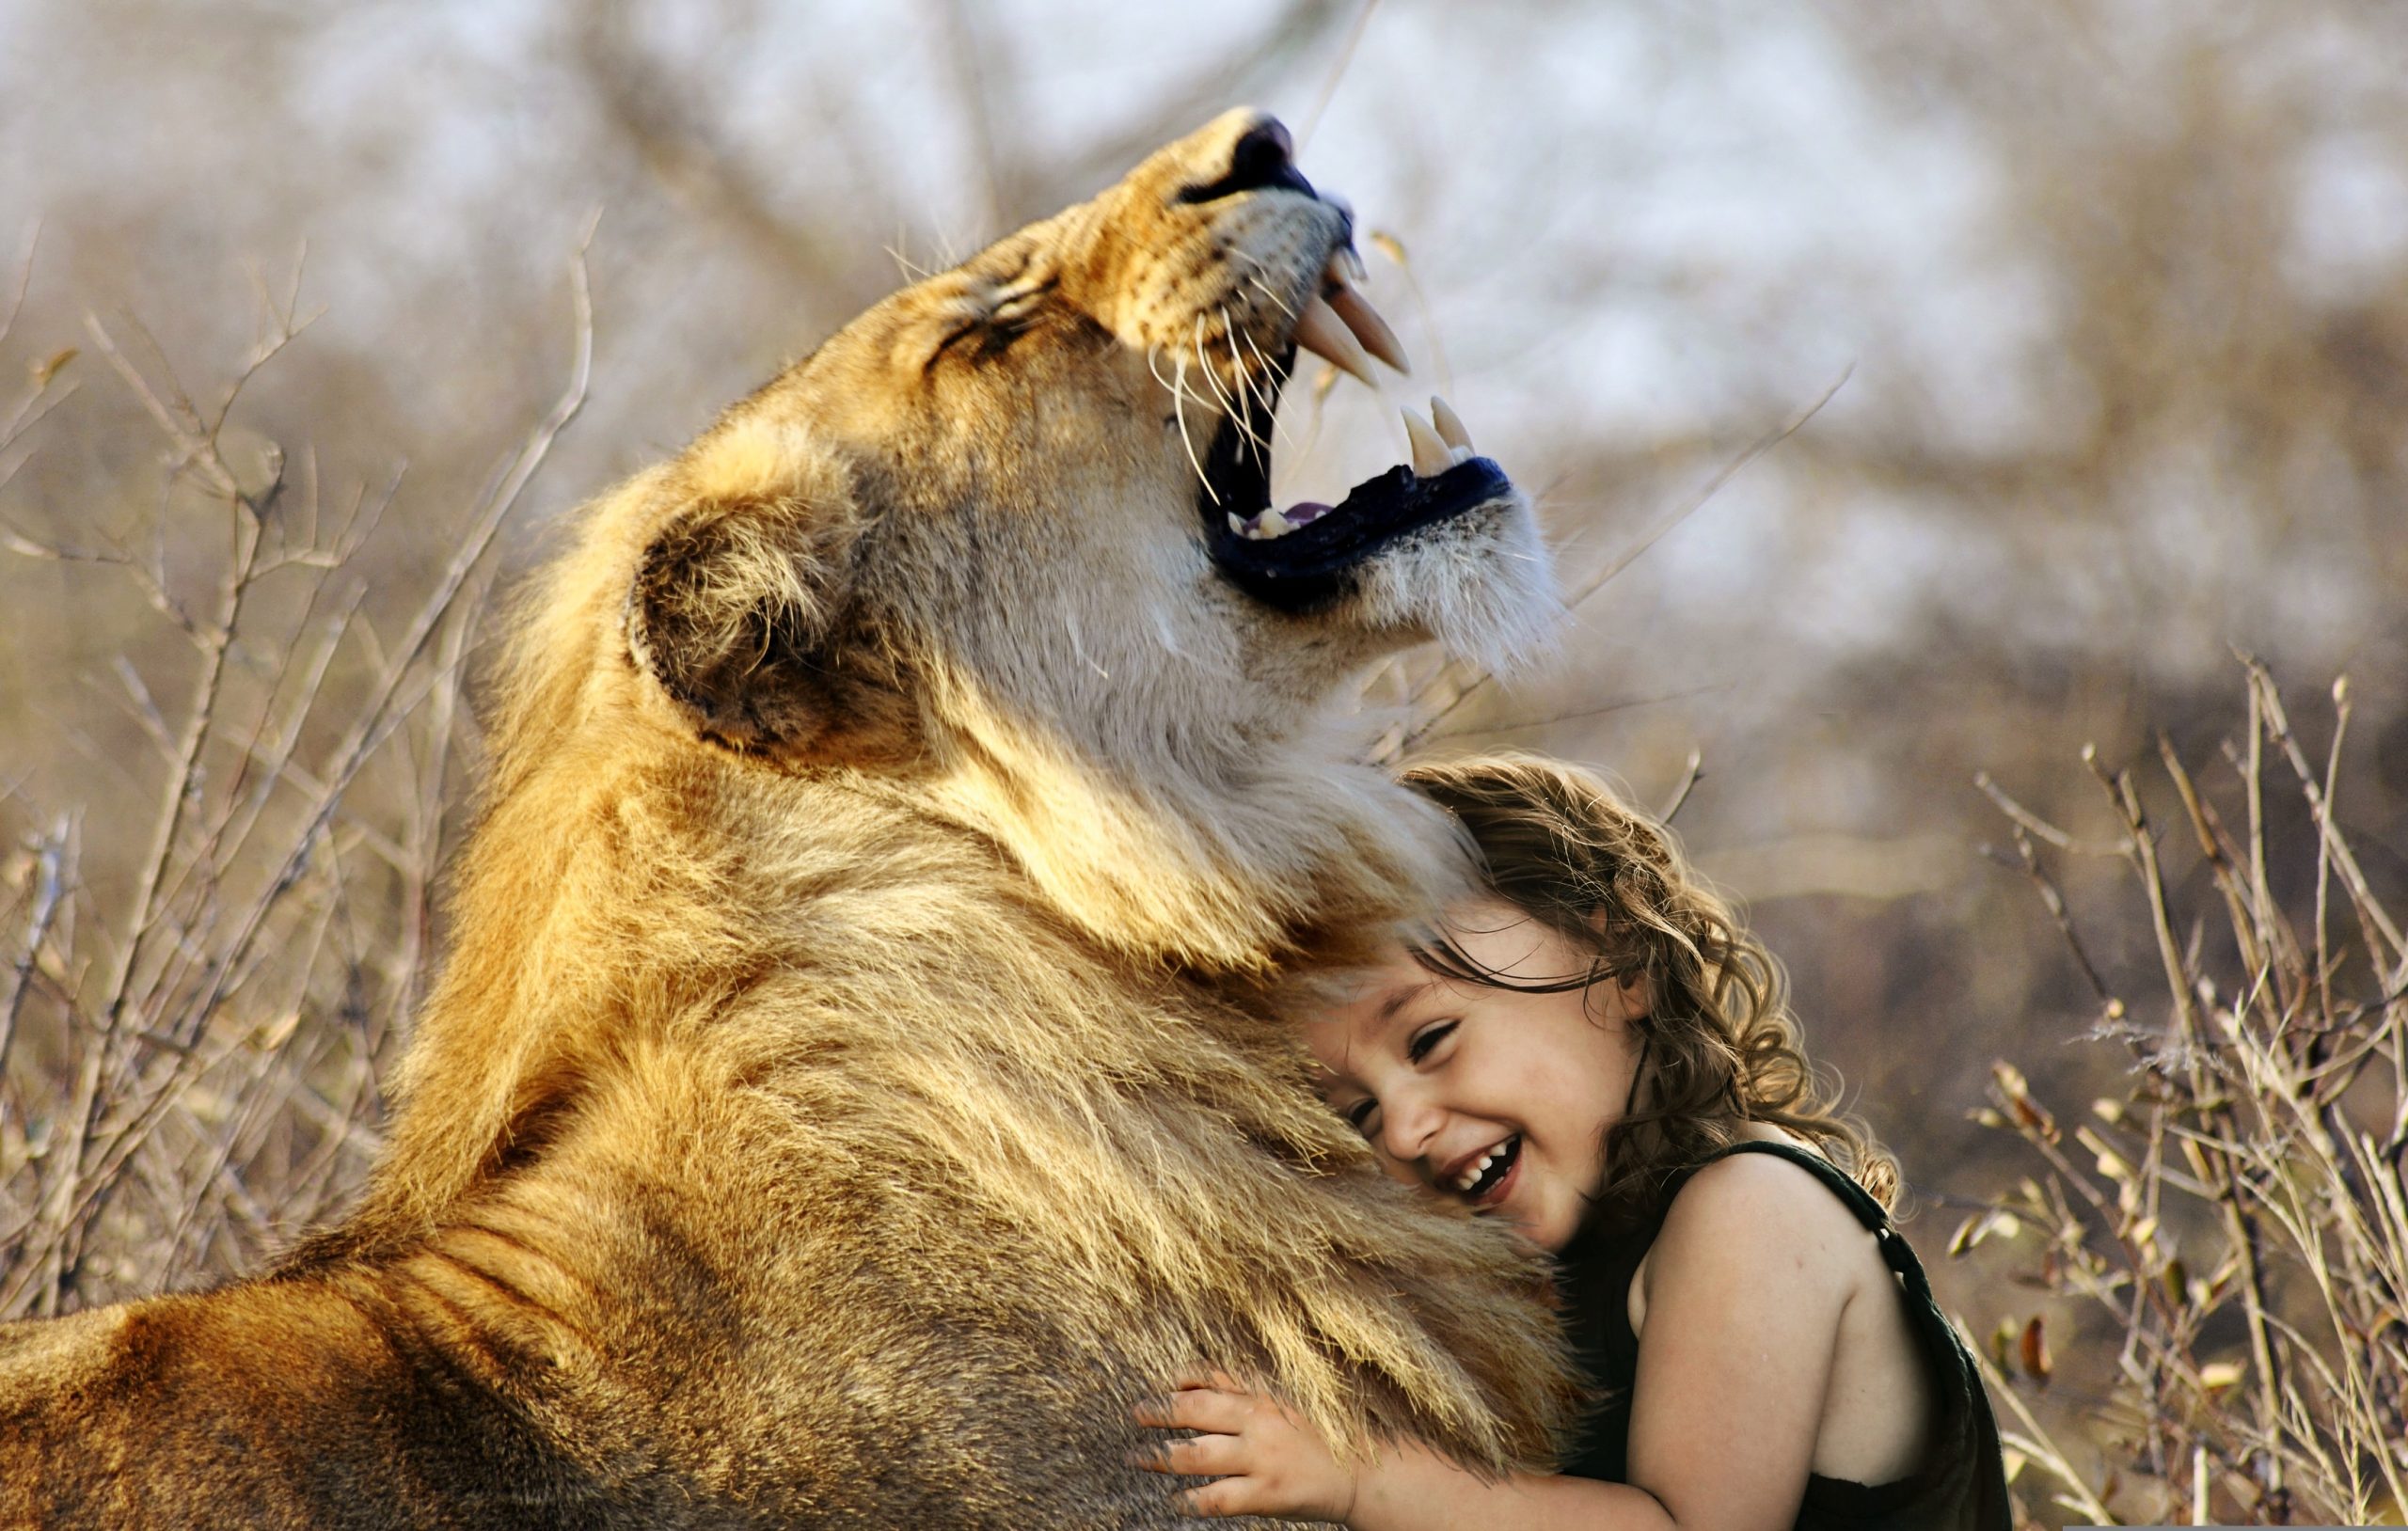 The enjoyment of the lion with the runt girl